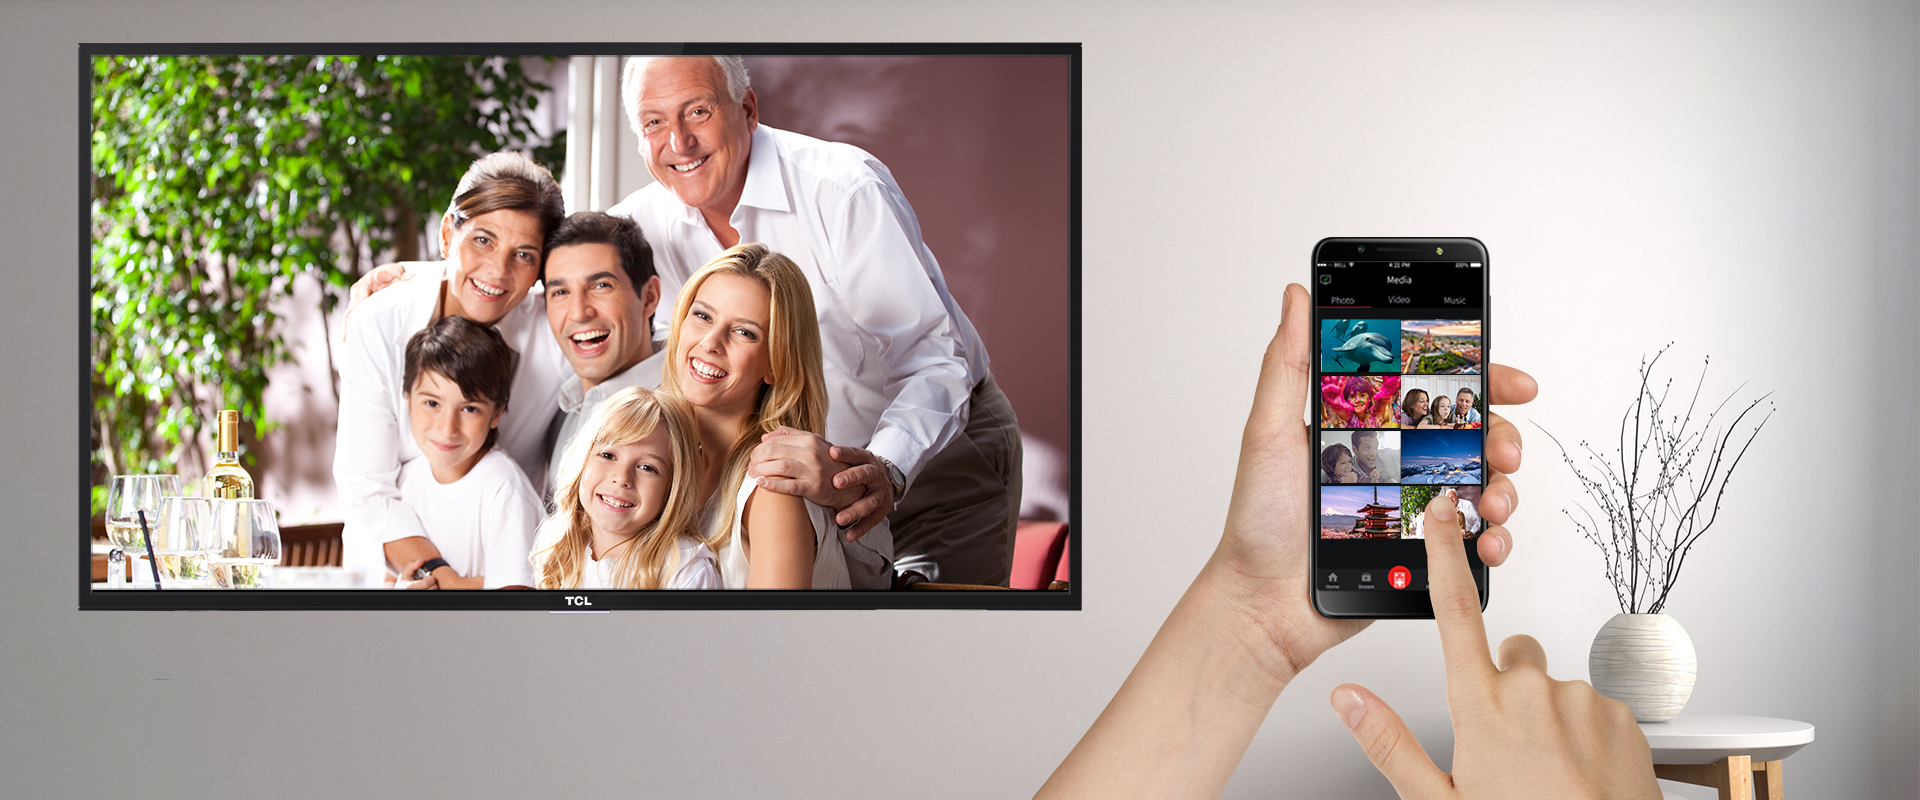 How to Set Up Your TV for Screen Casting (Android)